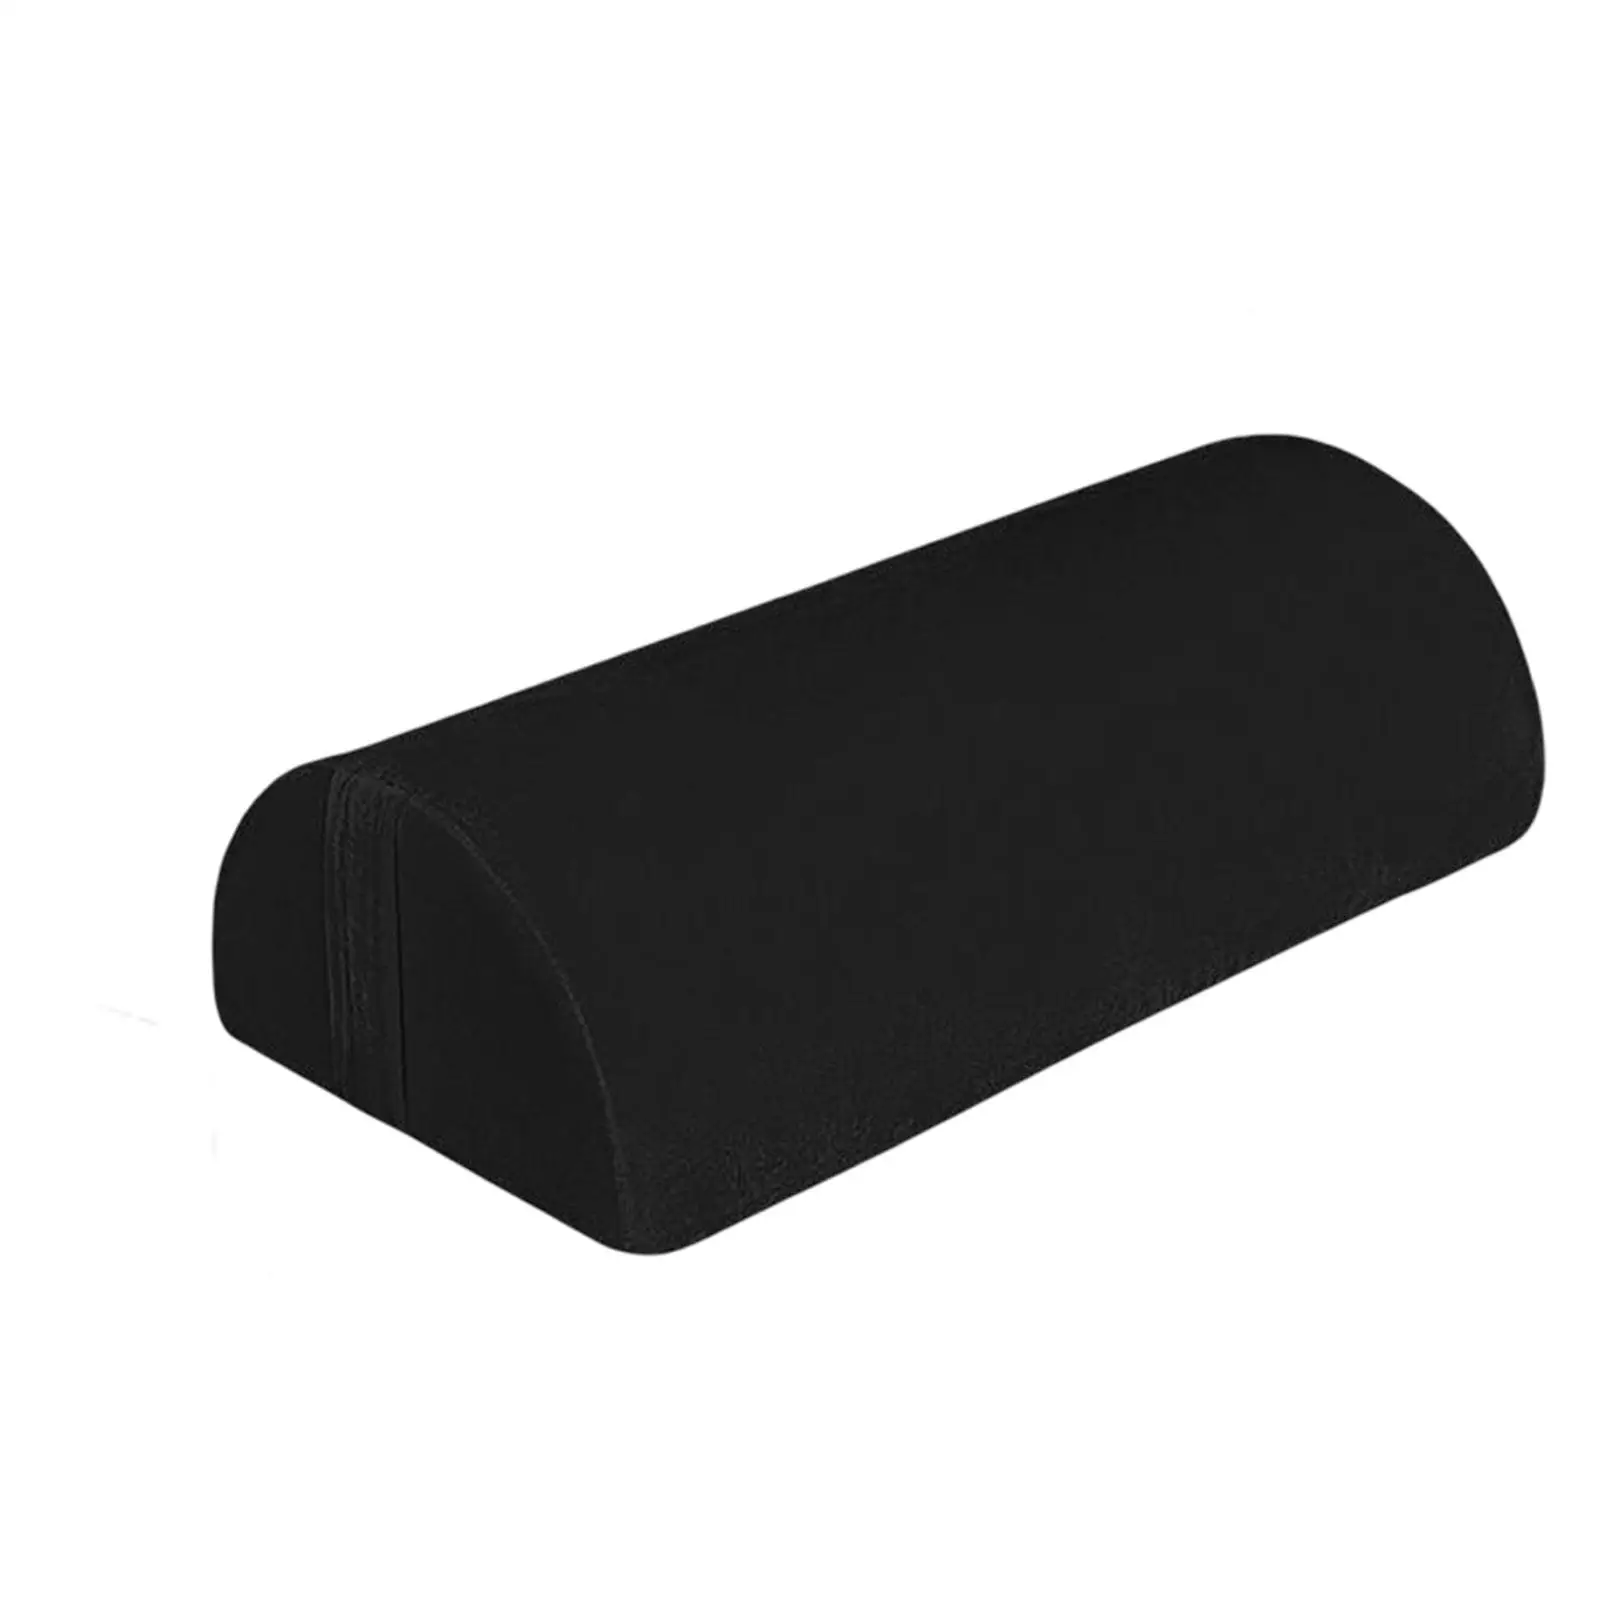 

Comfort Leg support Ergonomic Footrest Pillow Foot Rest Under Desk for Bed Car Gift Piano Office Accessories